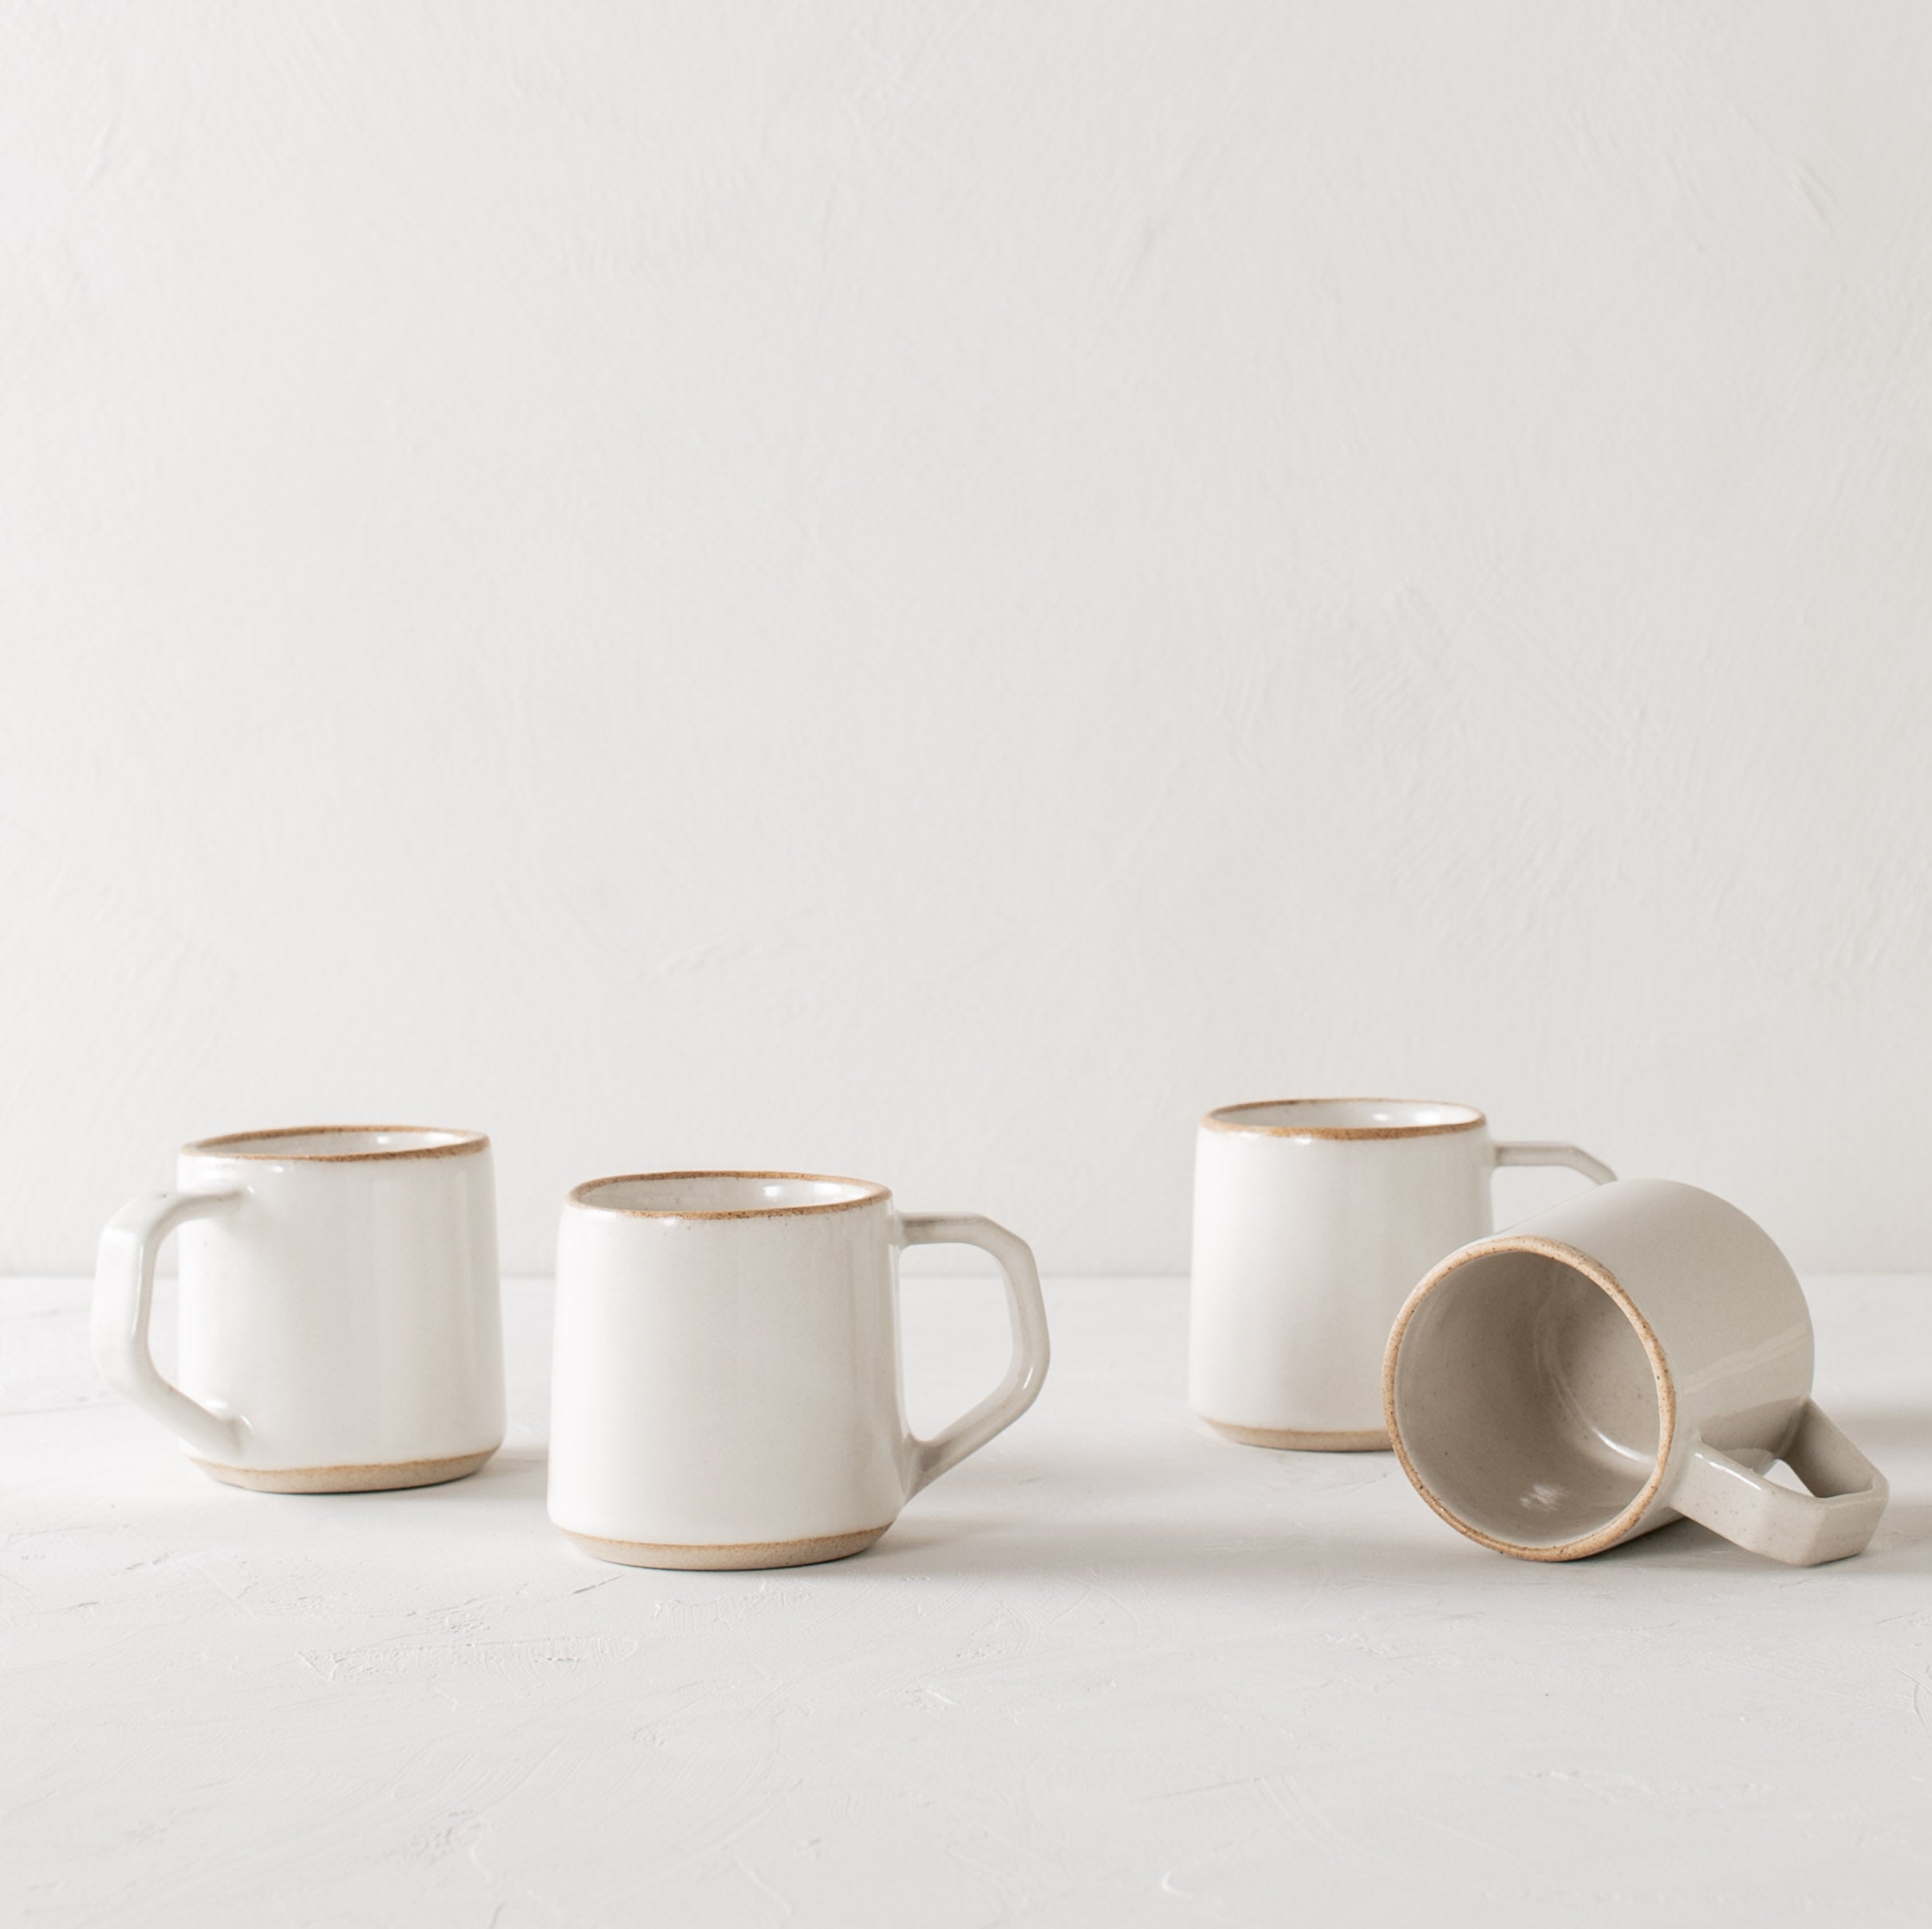 Four white minimal ceramic mugs is staged on a white textured table top and white textured back drop. Mugs have exposed warm stoneware on the rims as well as the base. Handles are geometric in shape but still rounded. Convivial Production, Kansas City Ceramics. Handmade ceramic mug